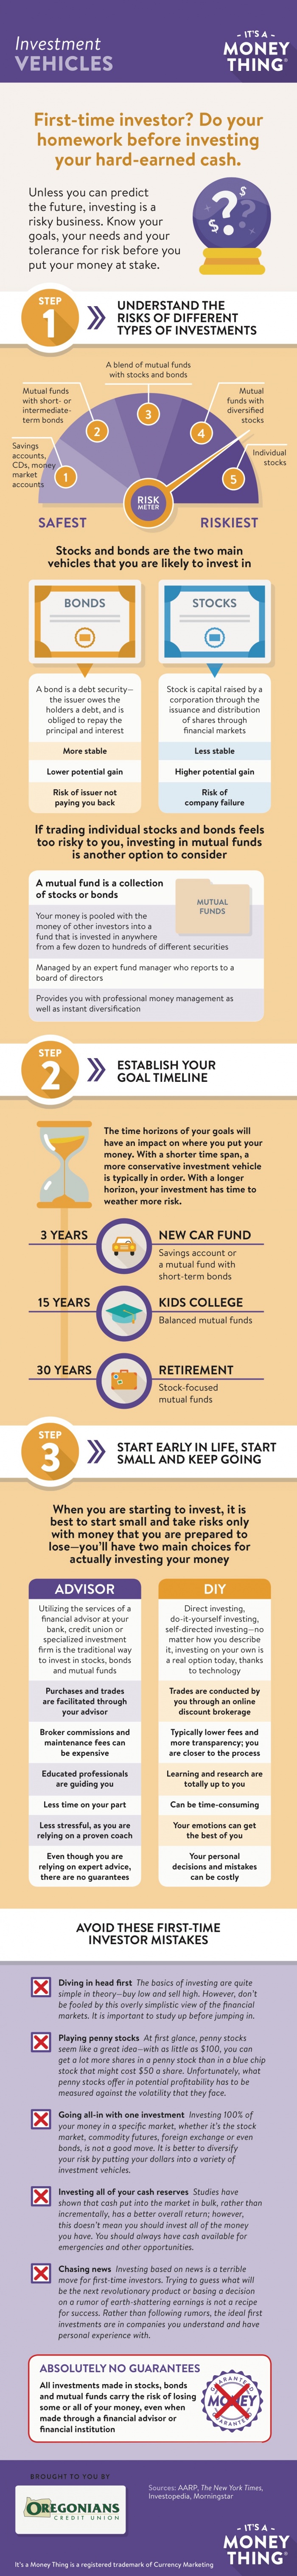 Investment Vehicles Infographic